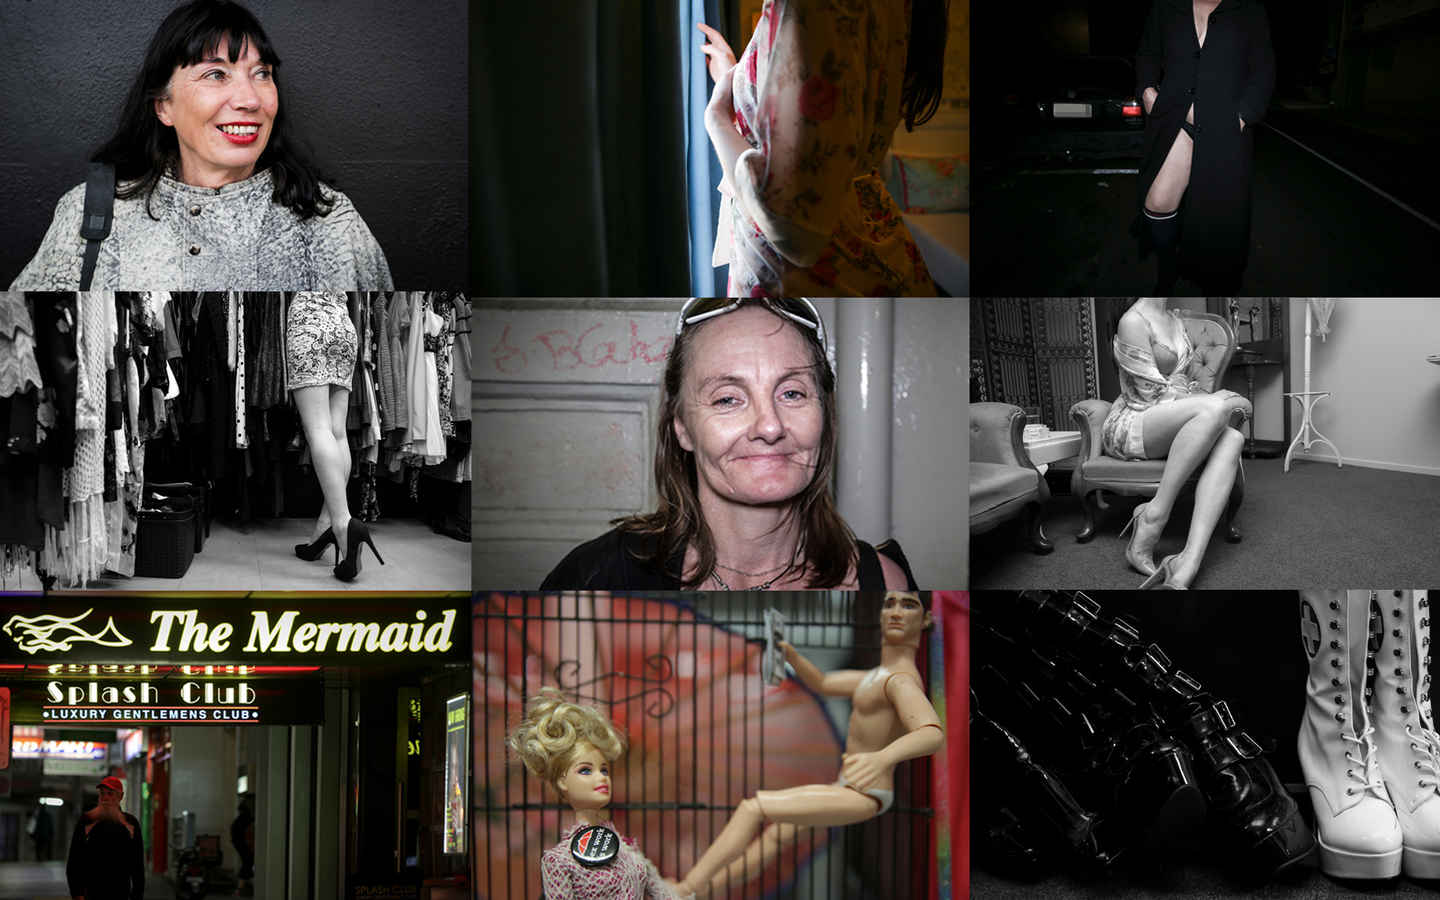 Behind the red lights of New Zealand's brothels